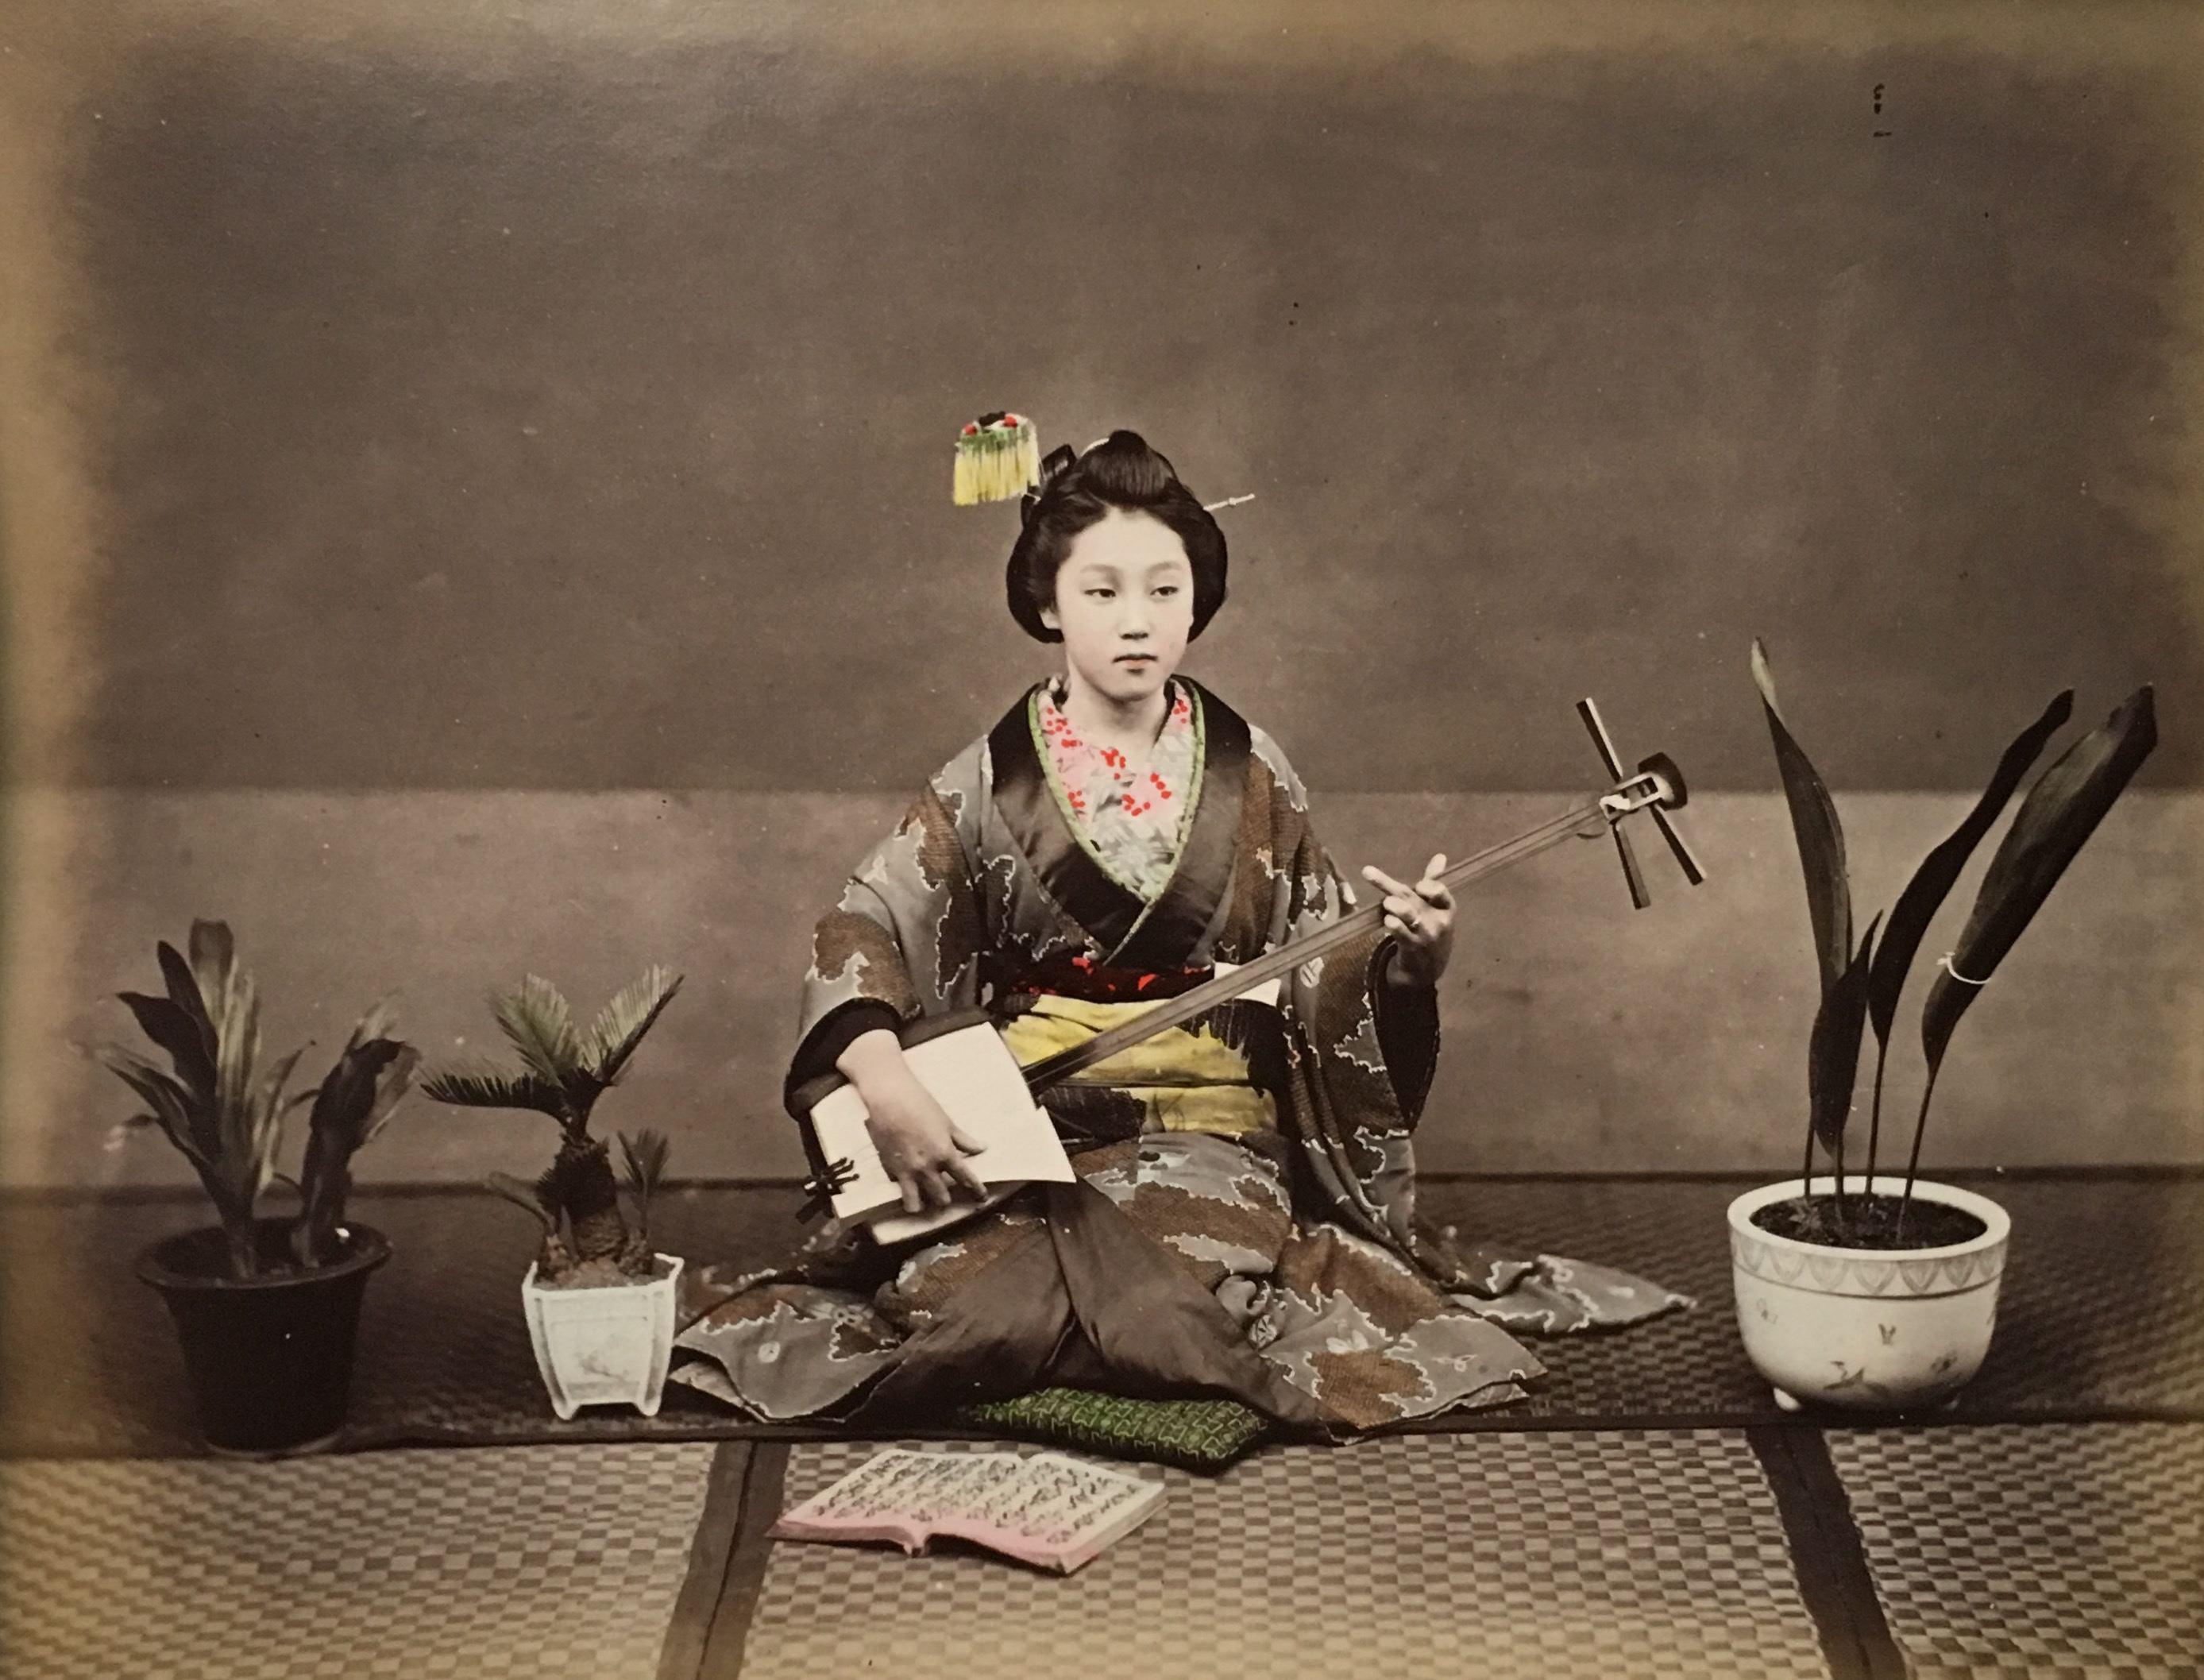 Unidentified Photographer  Color Photograph - Girl Playing Instrument, c. 1880